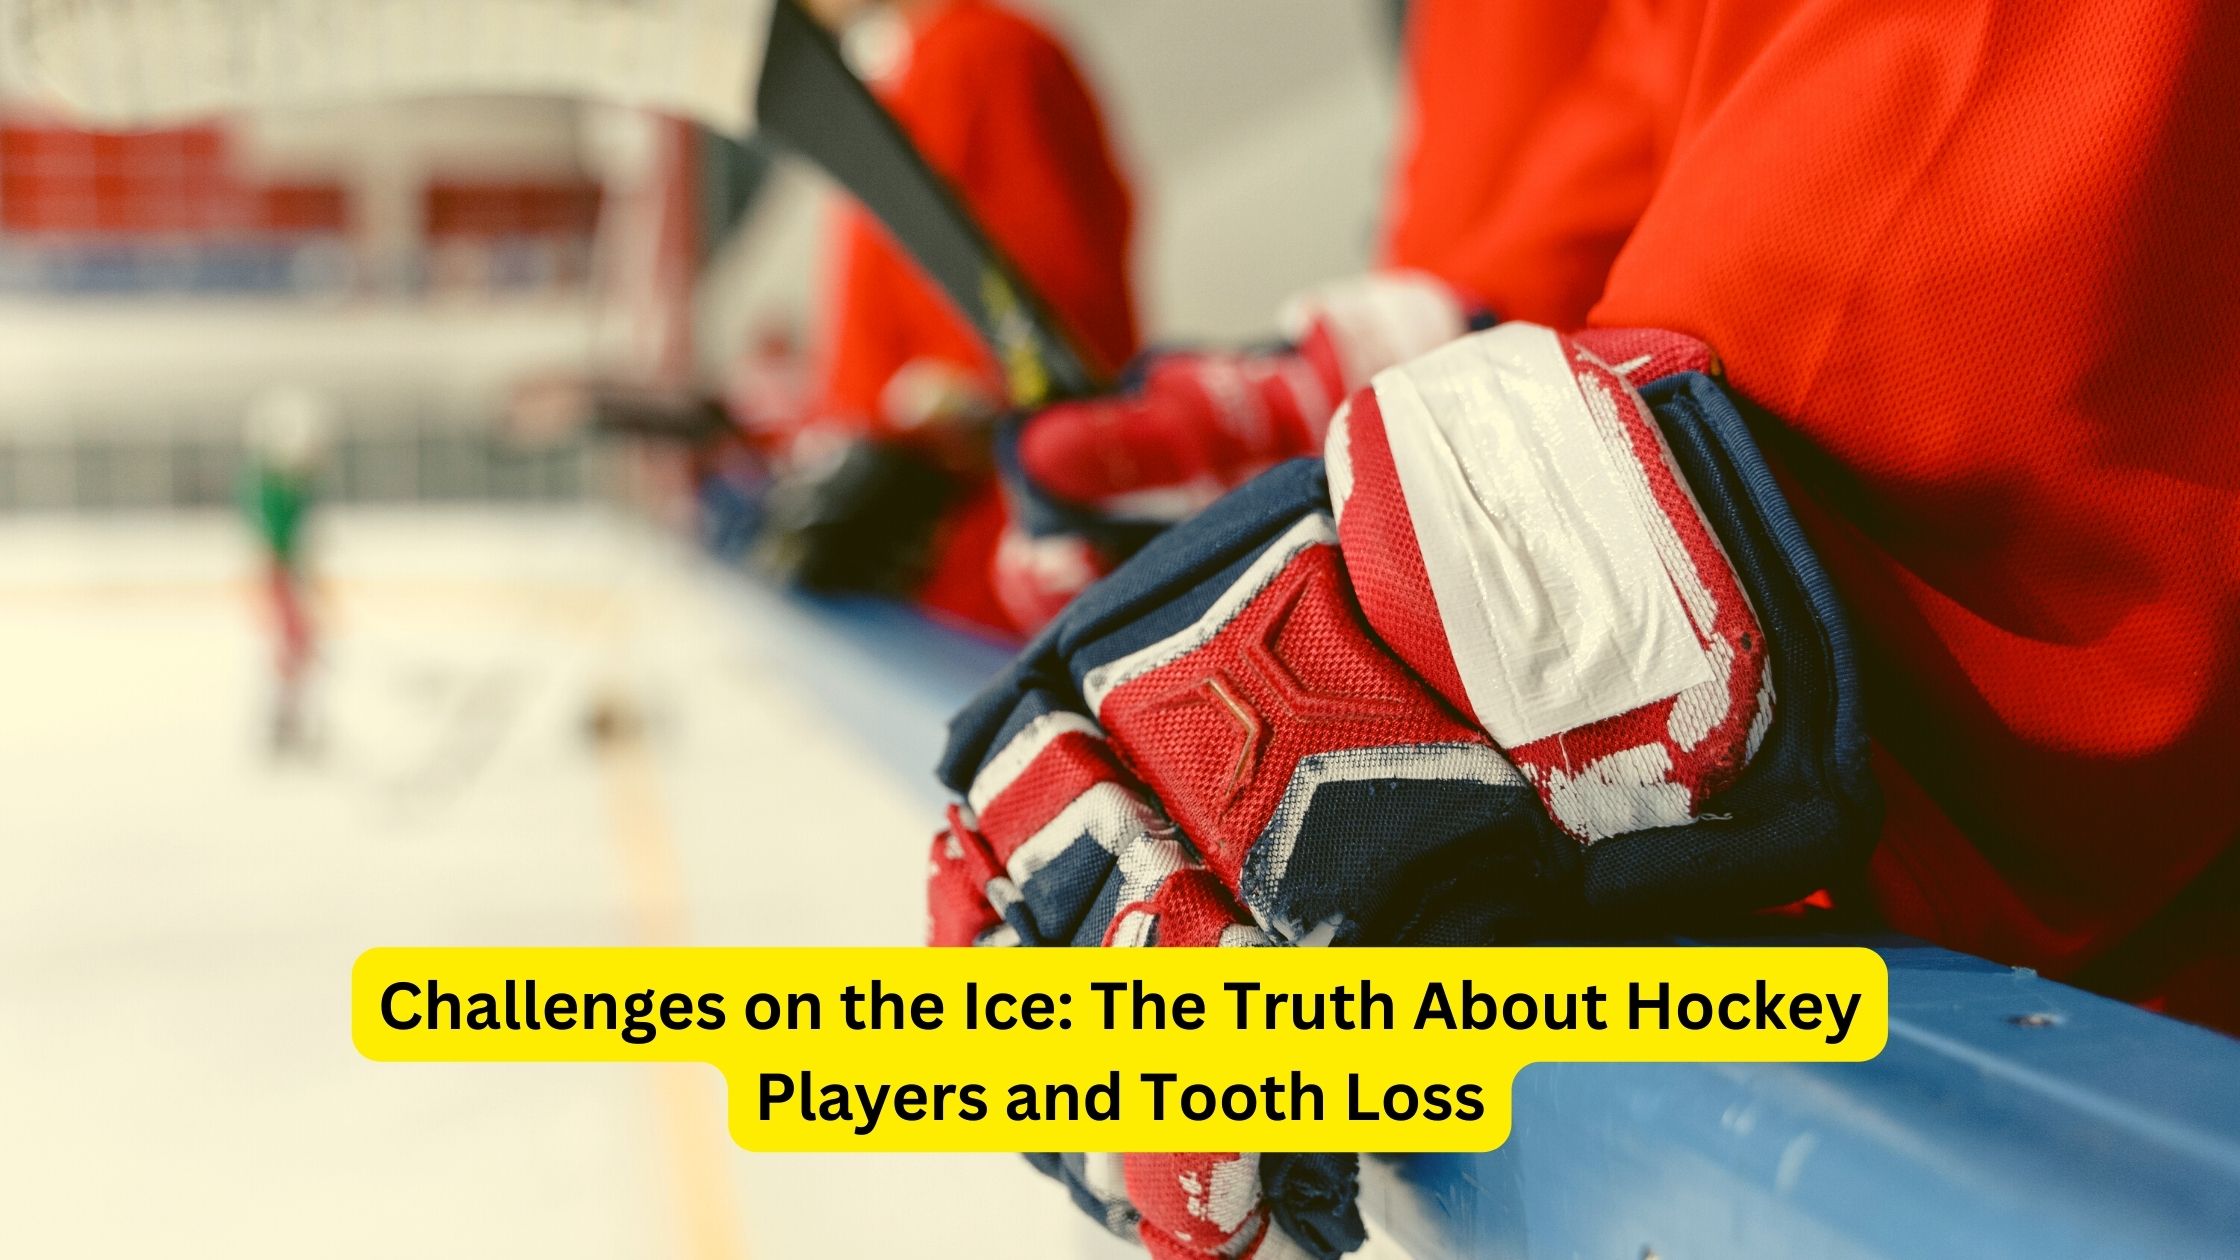 Challenges on the Ice: The Truth About Hockey Players and Tooth Loss